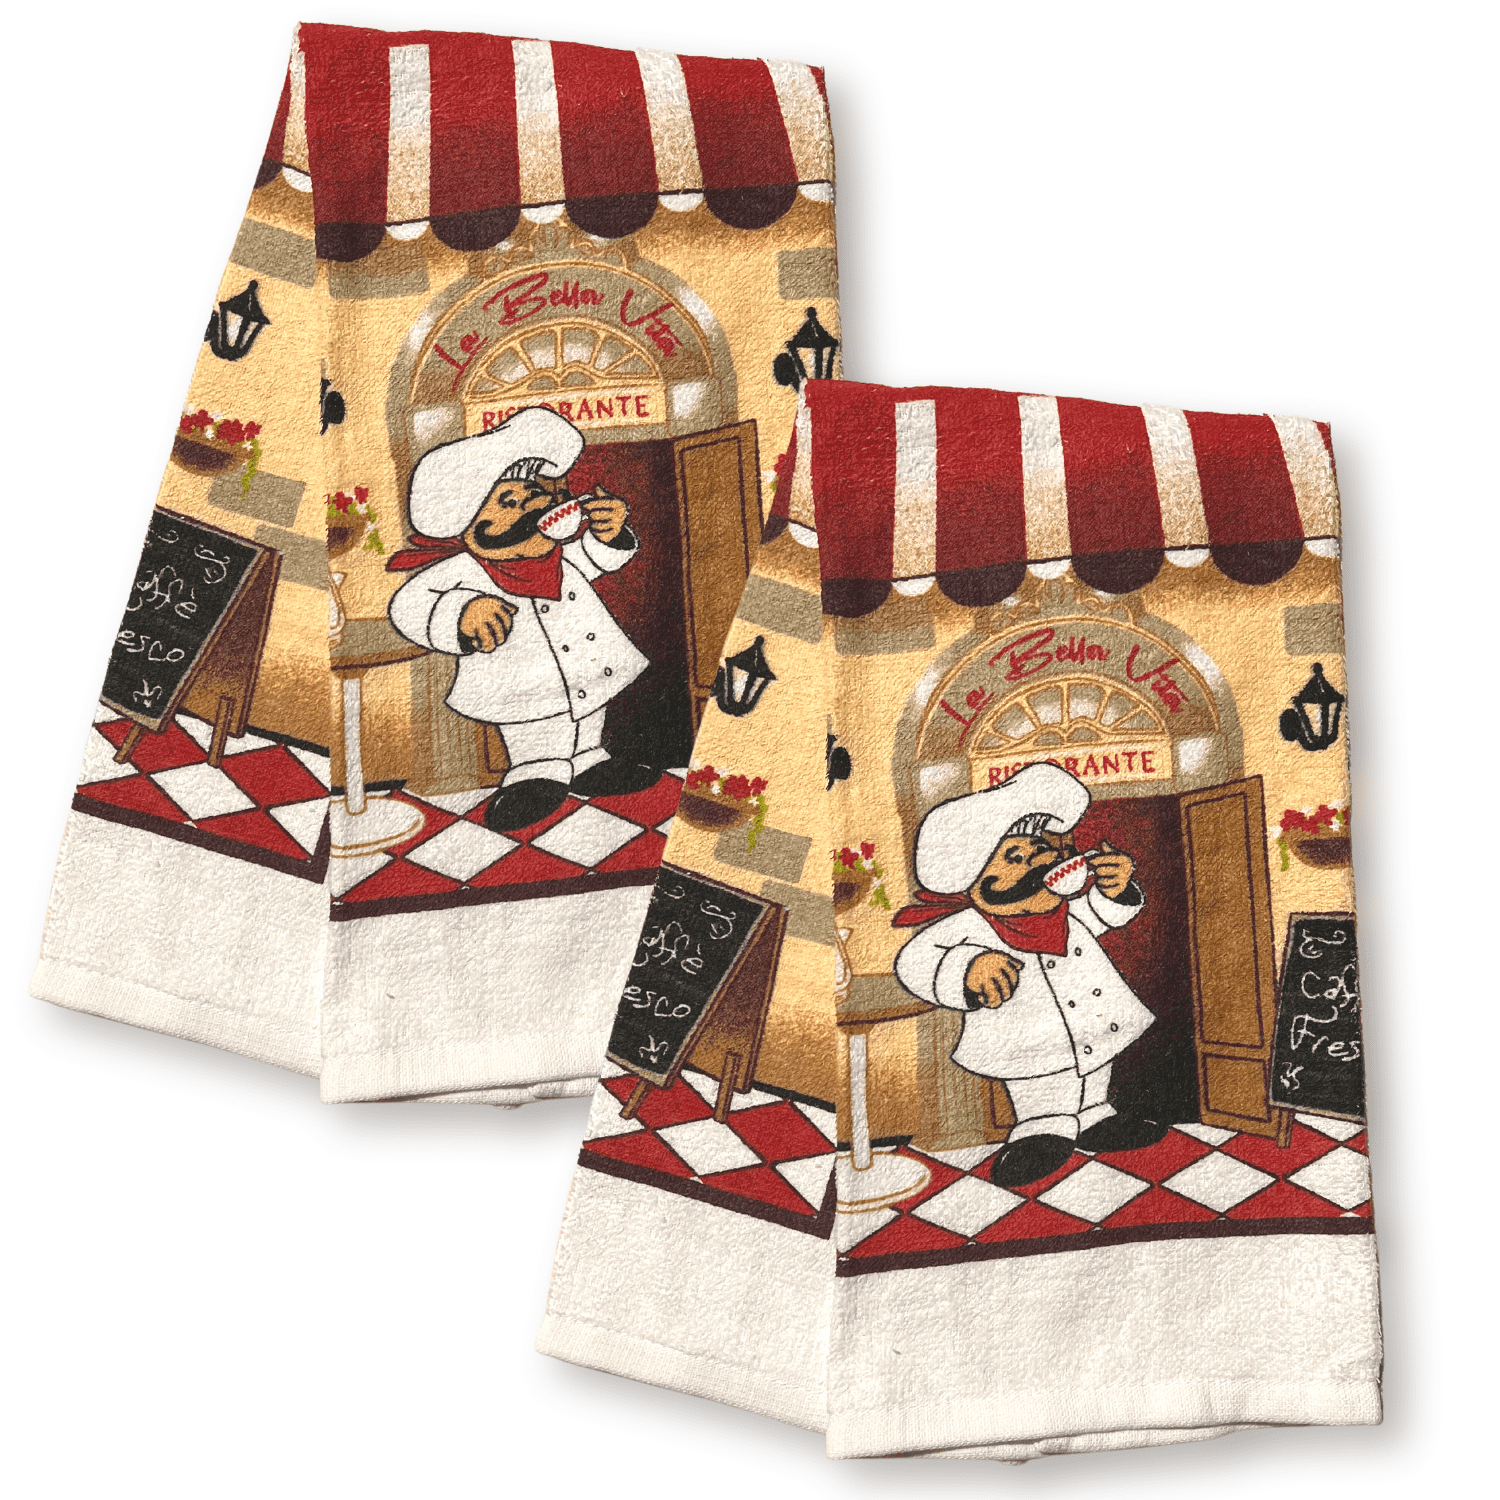 Details about   NEW Kitchen Dish Hand Towels Restaurant Chef Baking Theme Set of 2 FREE SHIPPING